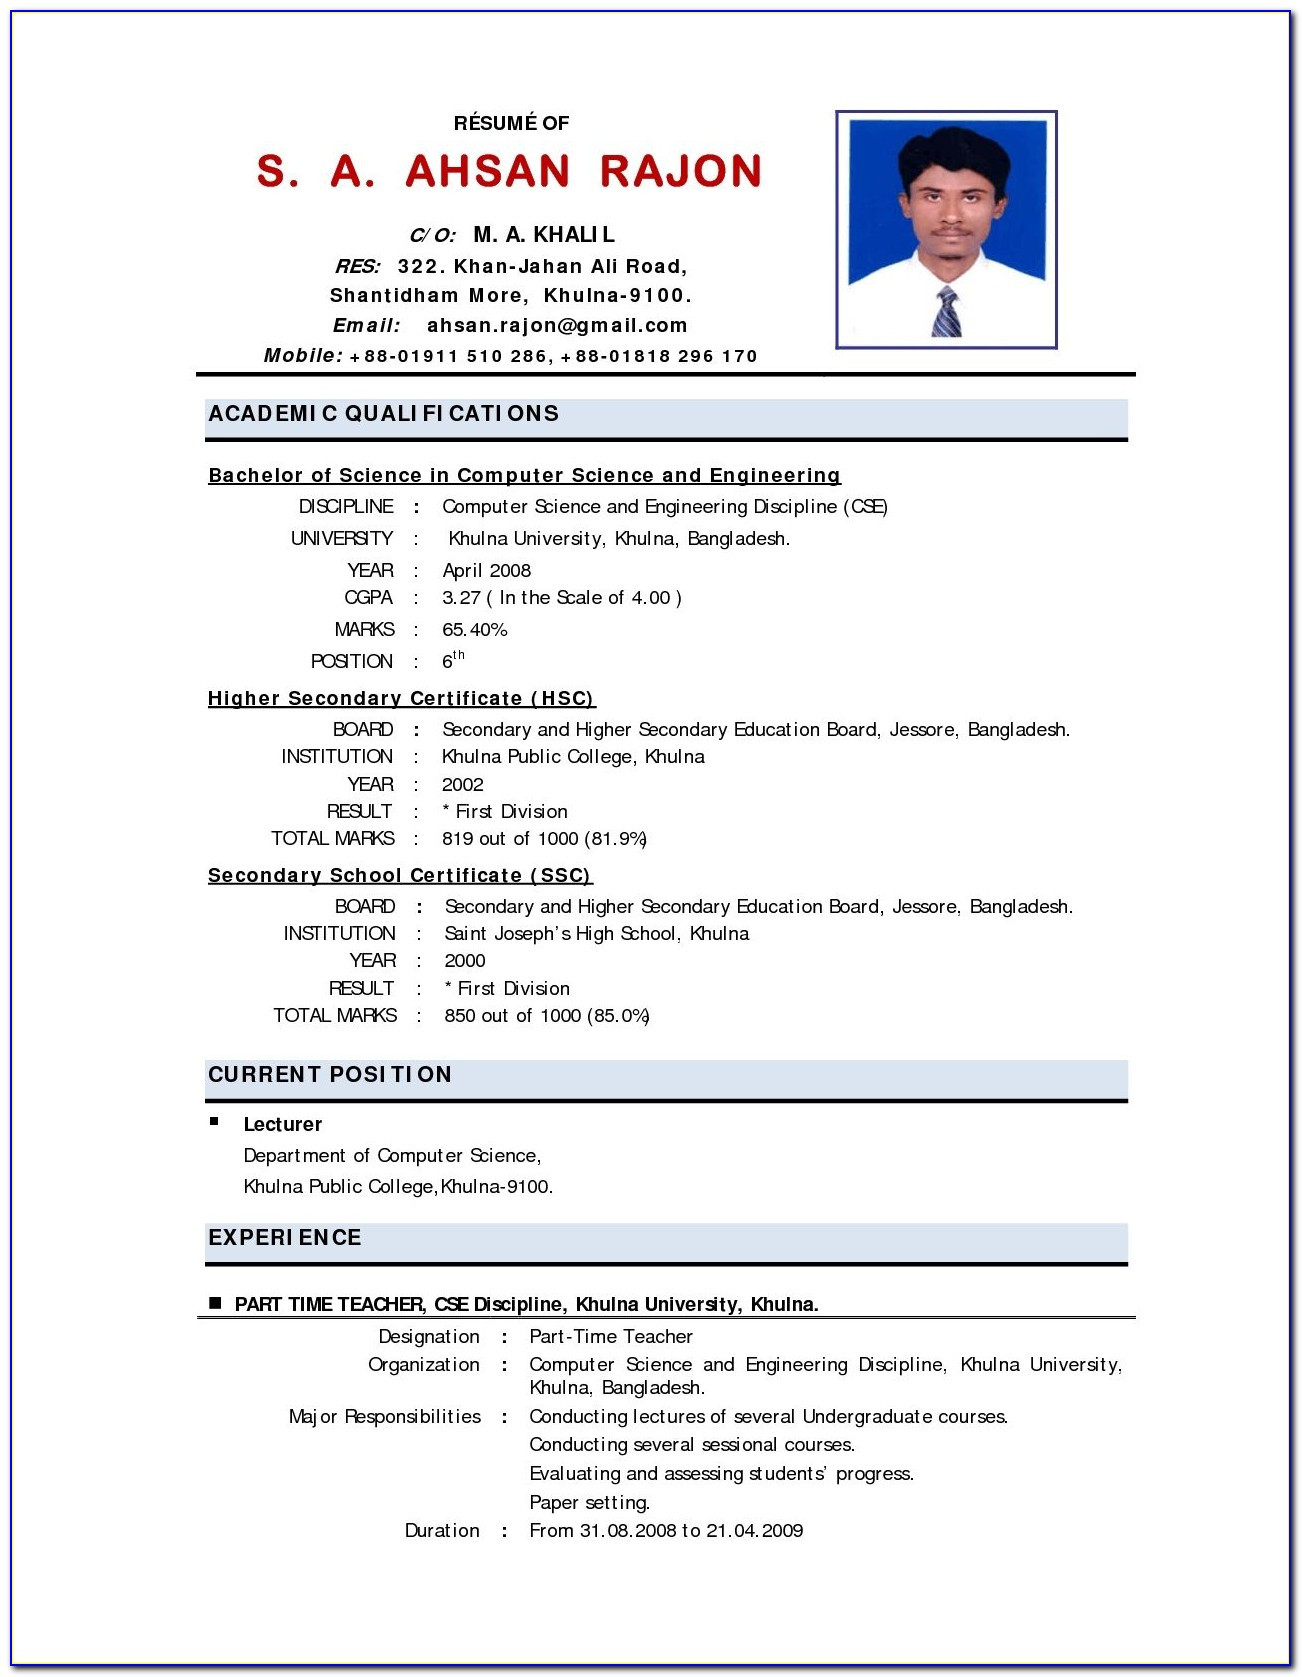 Sample Of Resume with 2×2 Picture Resume format for Teaching Post – Lets Face the Music and Resume …